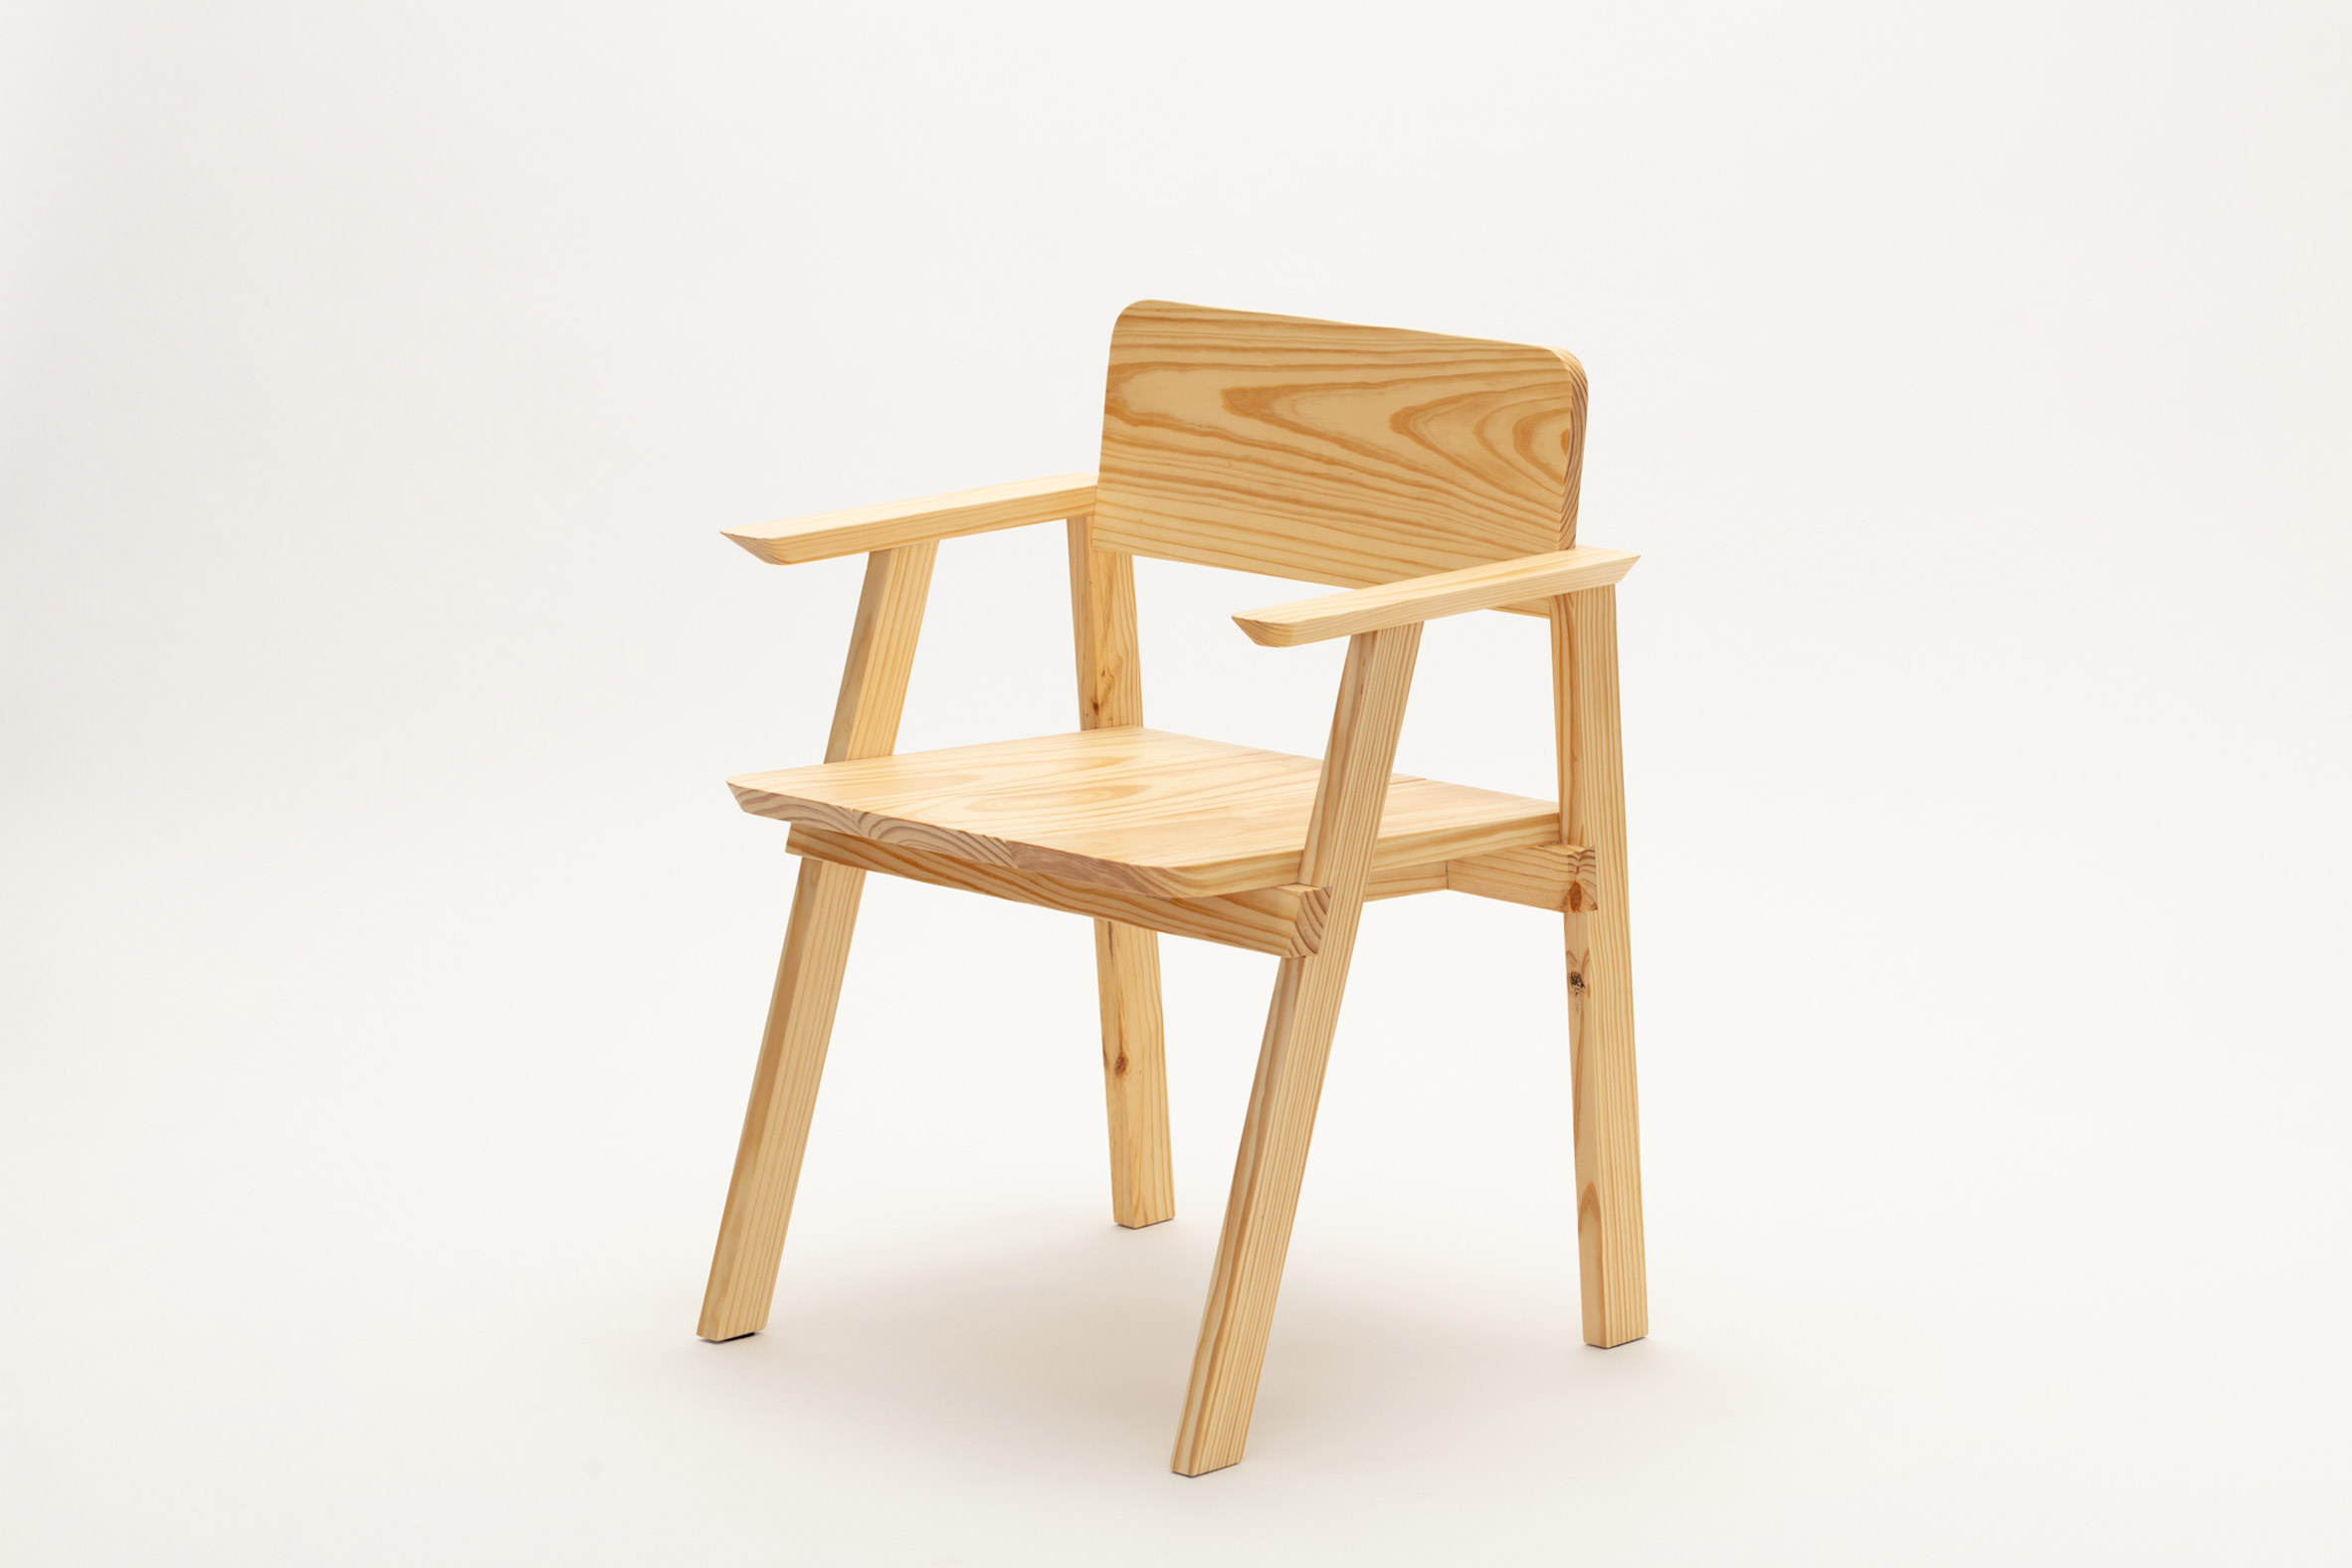 Dining chair with armrests from Jorge Diego Etienne's Tempo collection for Techo